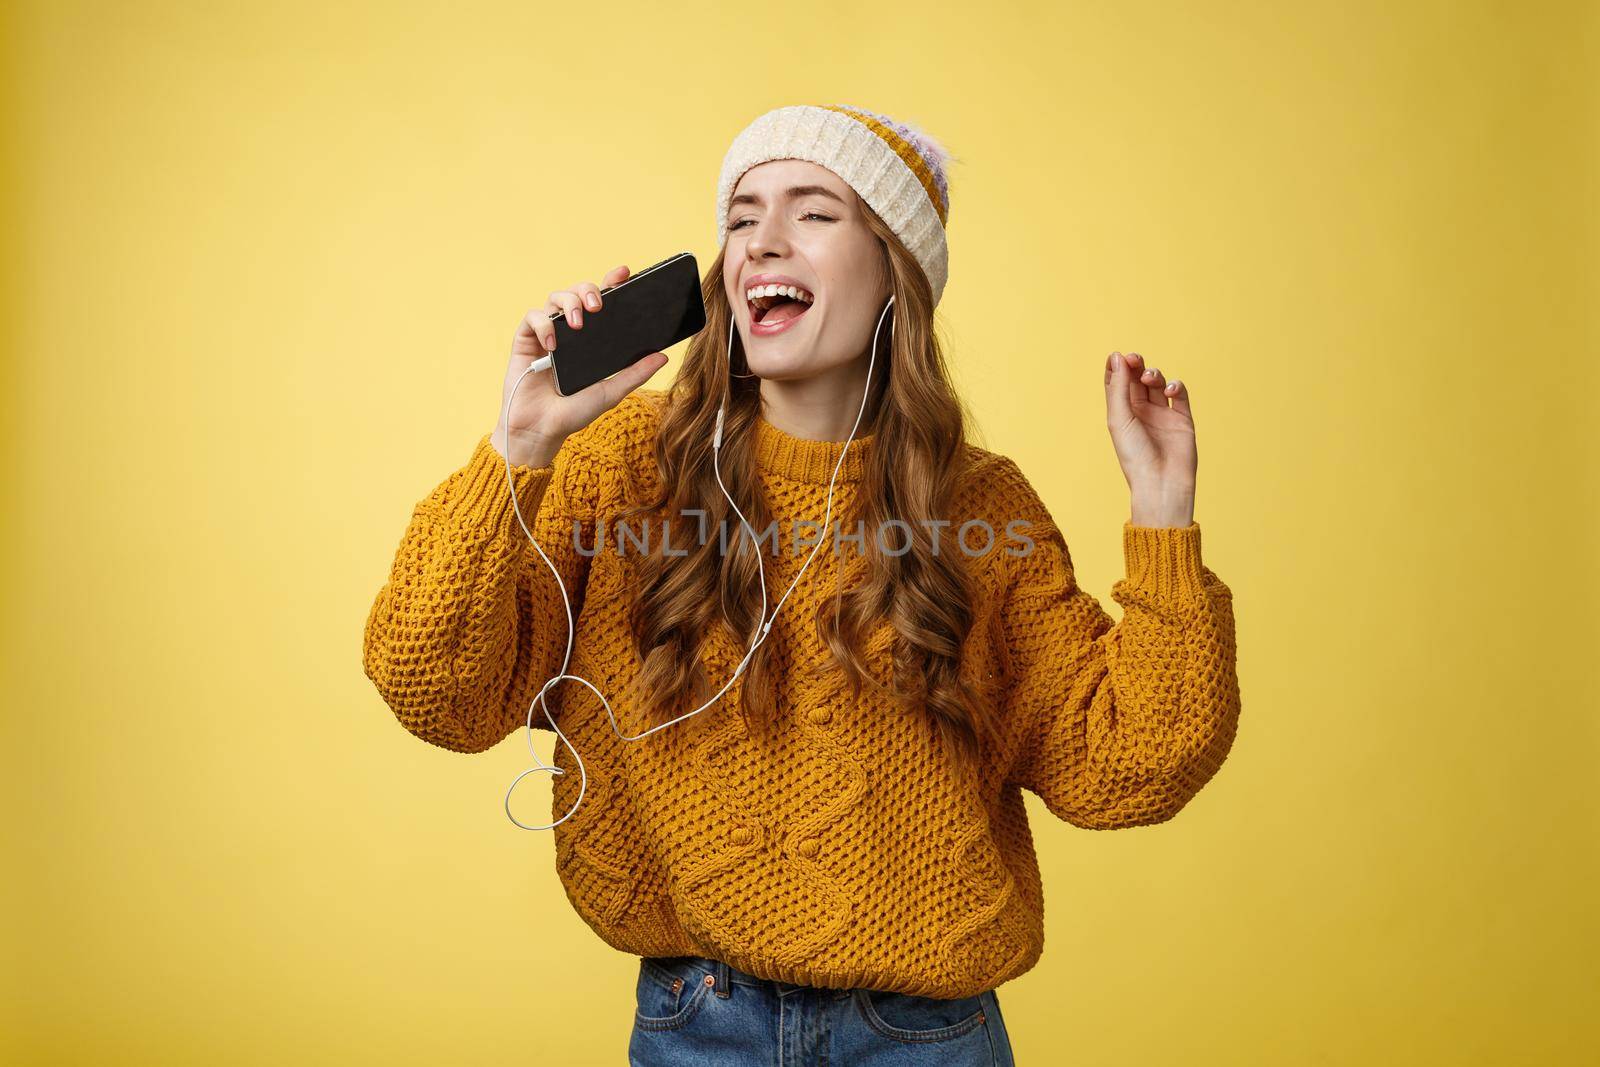 Carefree charming girl likes karaoke having fun listen favorite songs wearing wired earphones hold smartphone microphone singing out loud dancing enjoying spend time alone. Technology concept